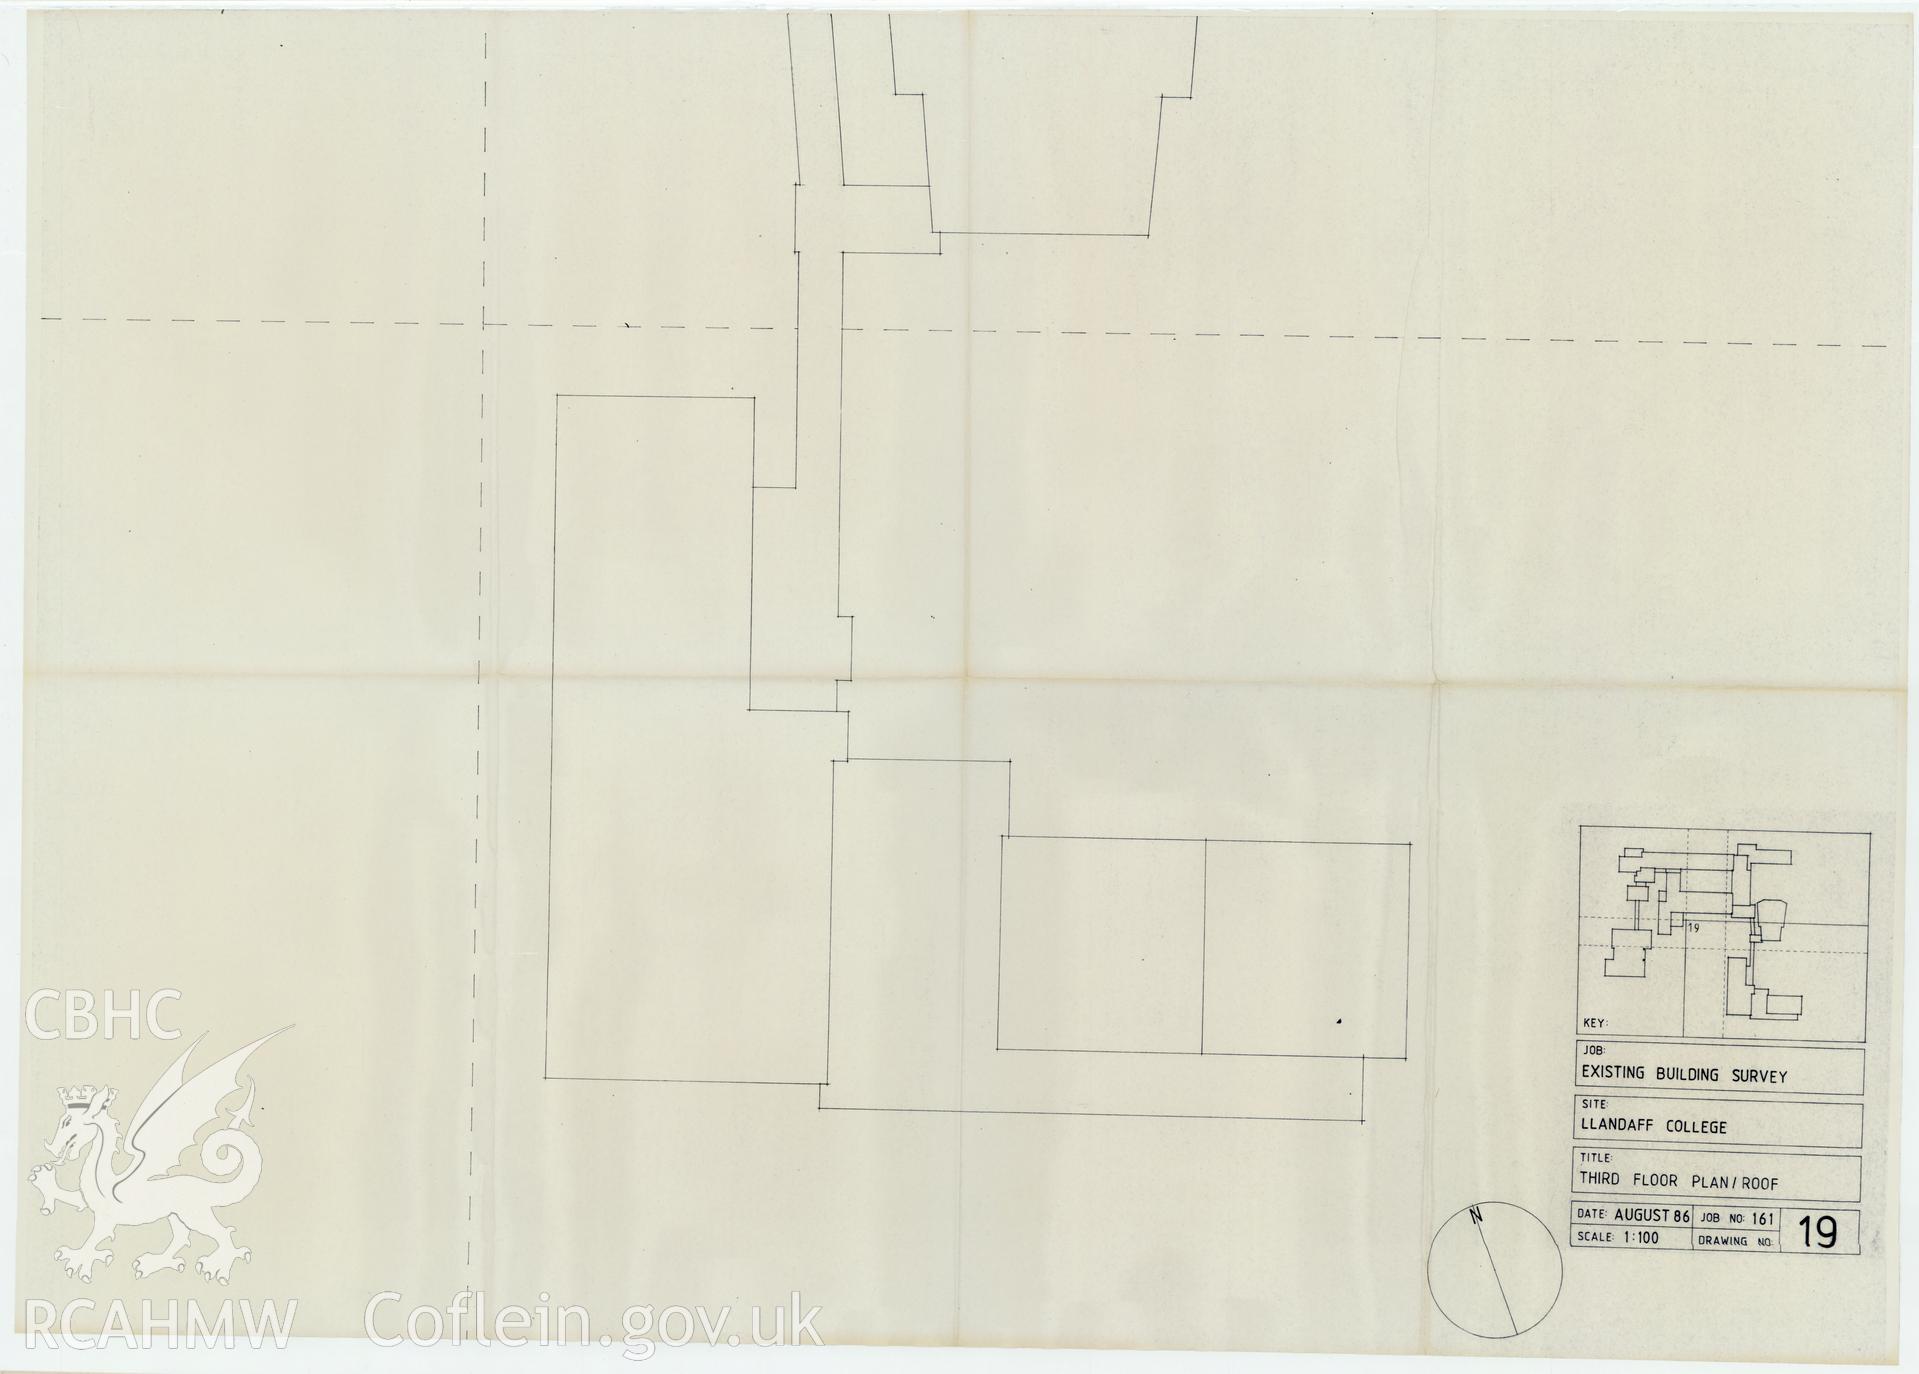 Plan of the third floor of Llandaff College, Cardiff. The existing building survey, August 1986, No 19.